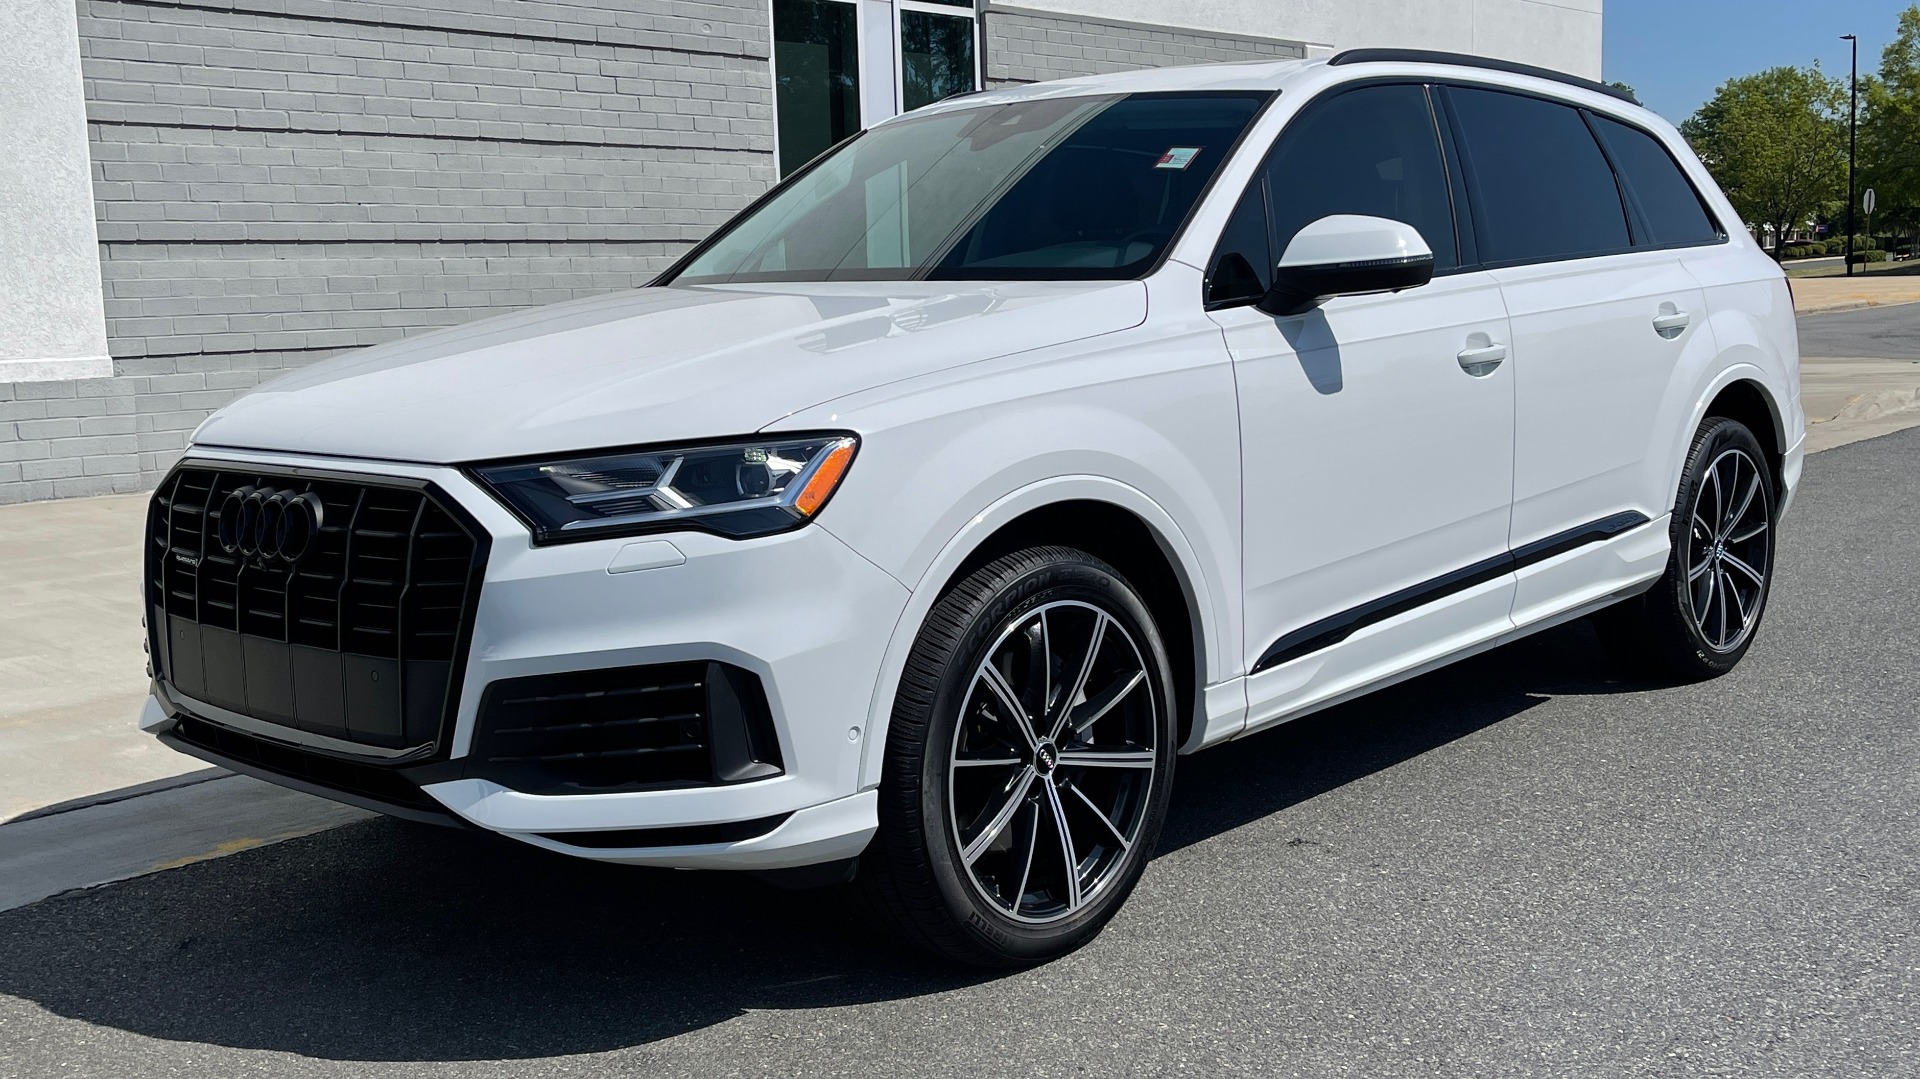 Used 2020 Audi Q7 PREMIUM PLUS 3.0L / CLD WTHR / BLACK OPTIC / WARM WTHR / TOWING / REARVIEW for sale Sold at Formula Imports in Charlotte NC 28227 3